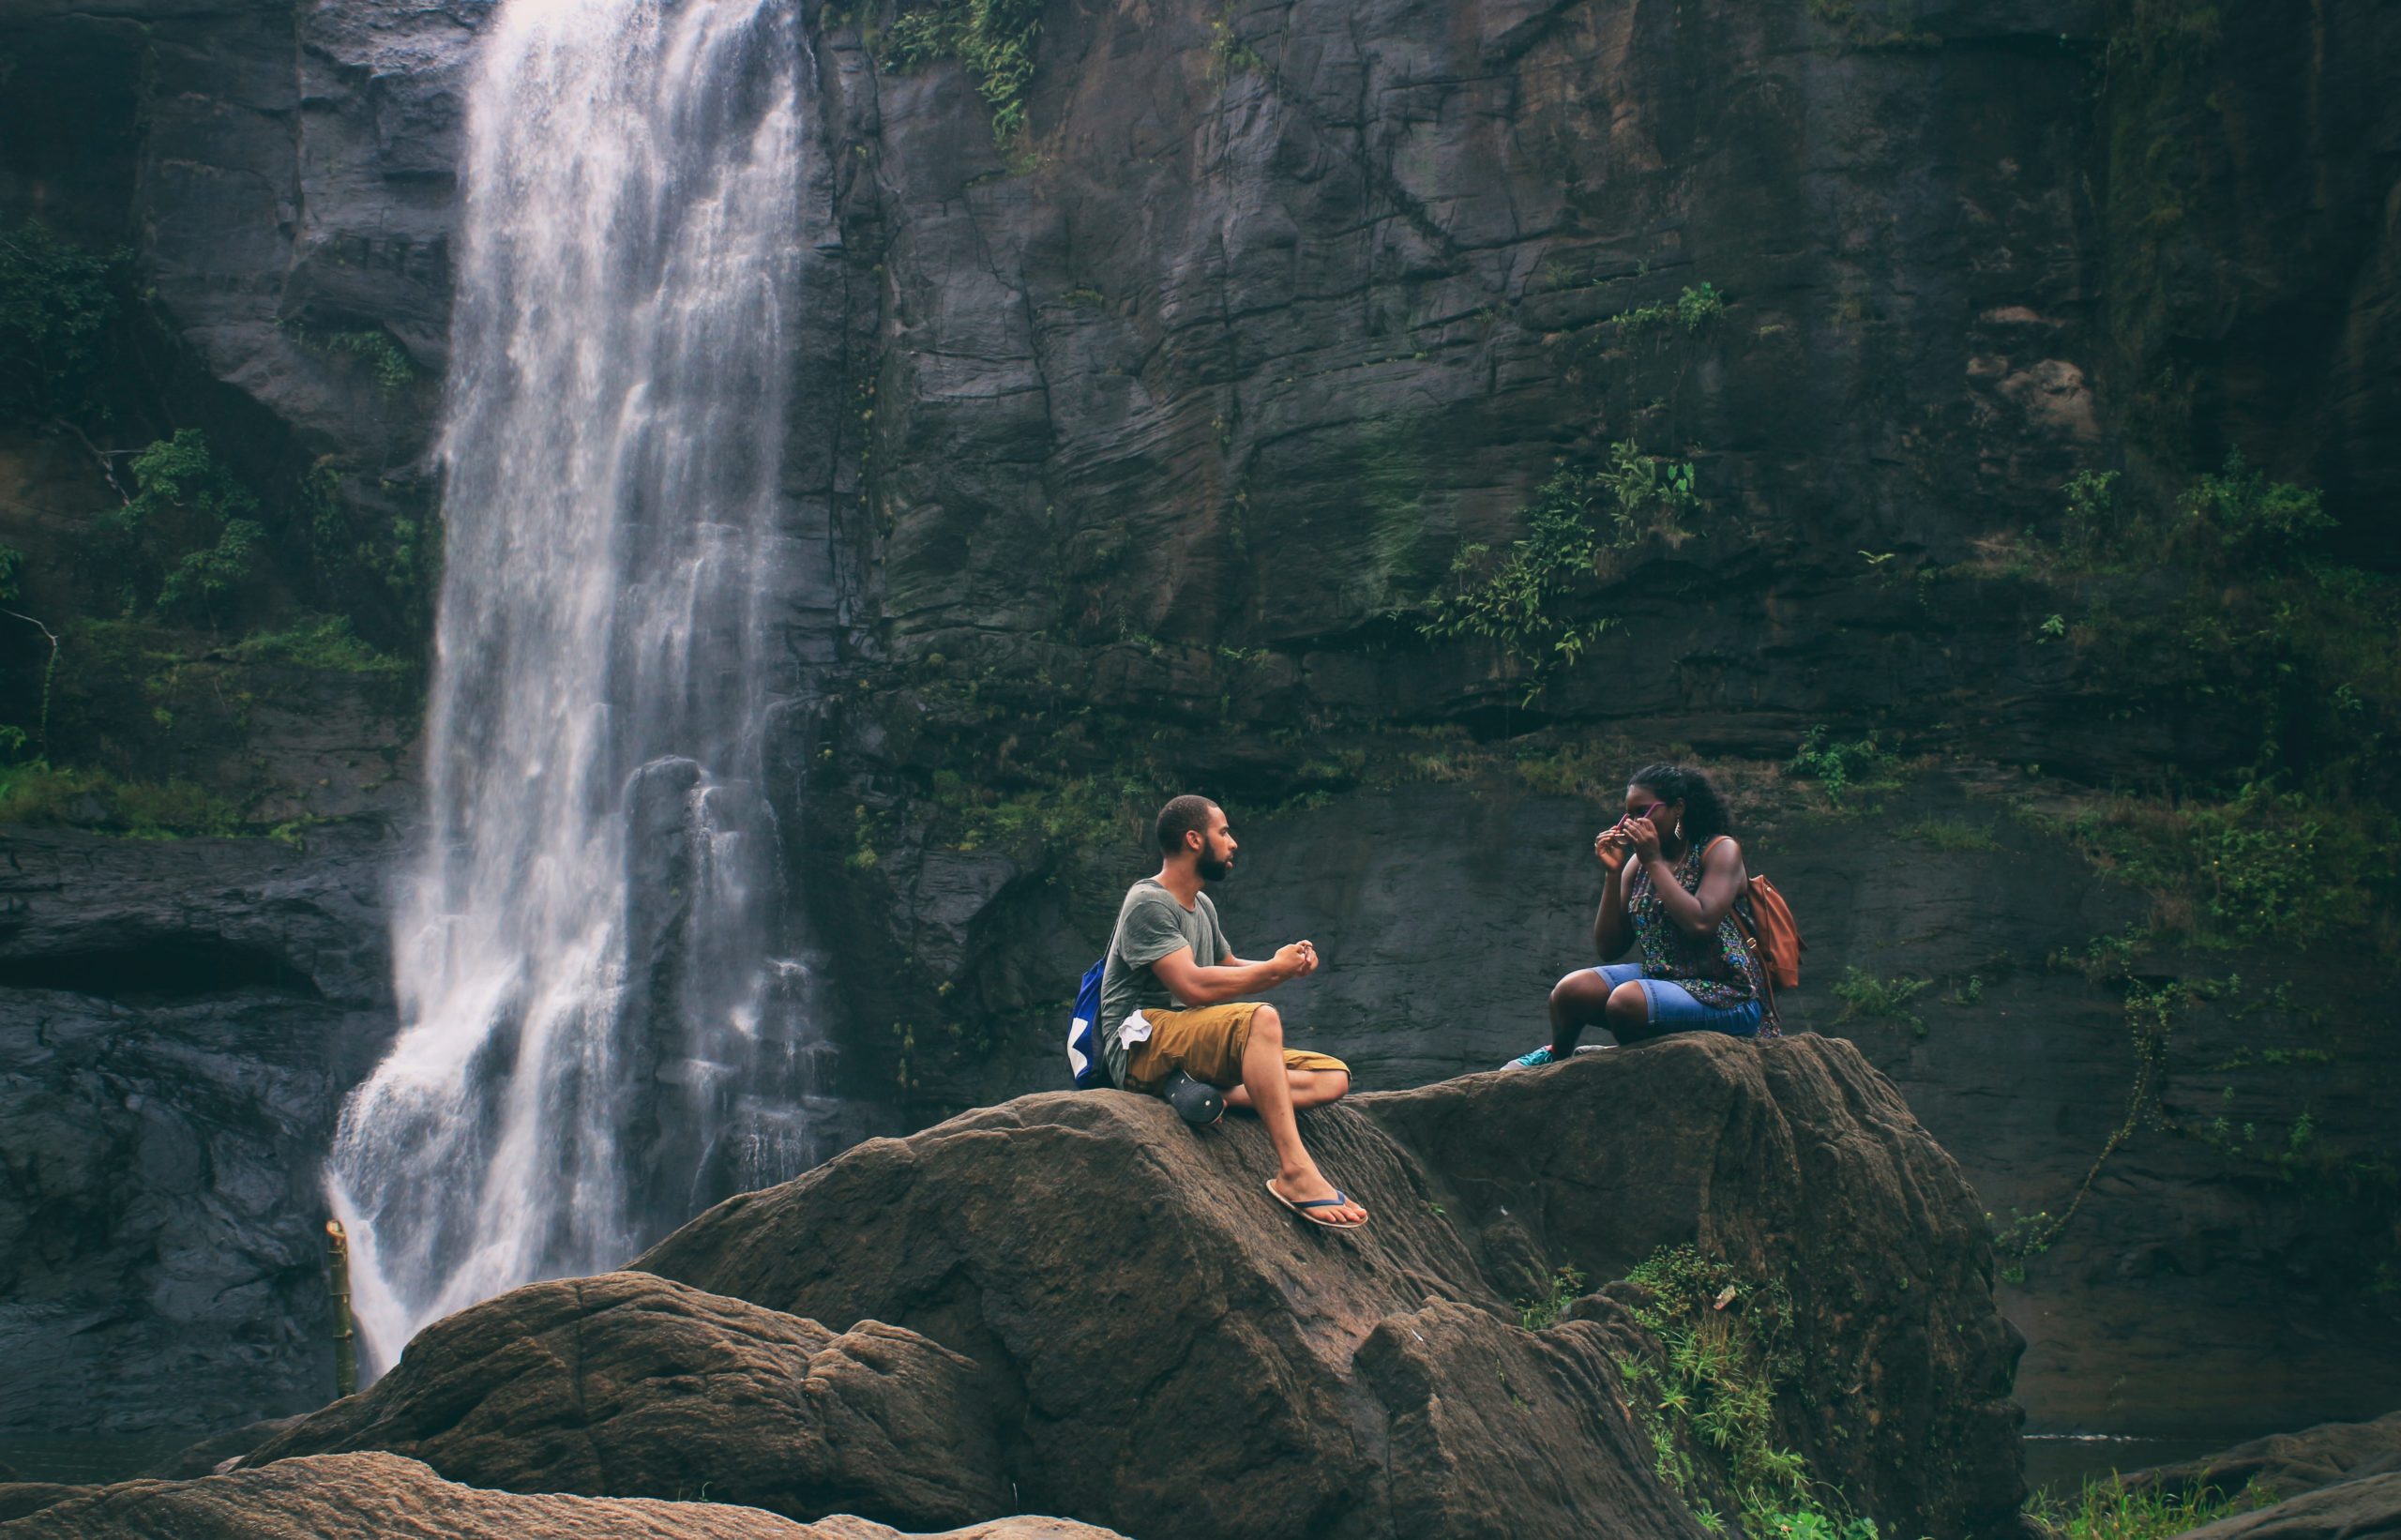 Two people sitting on rocks in front of a waterfall.